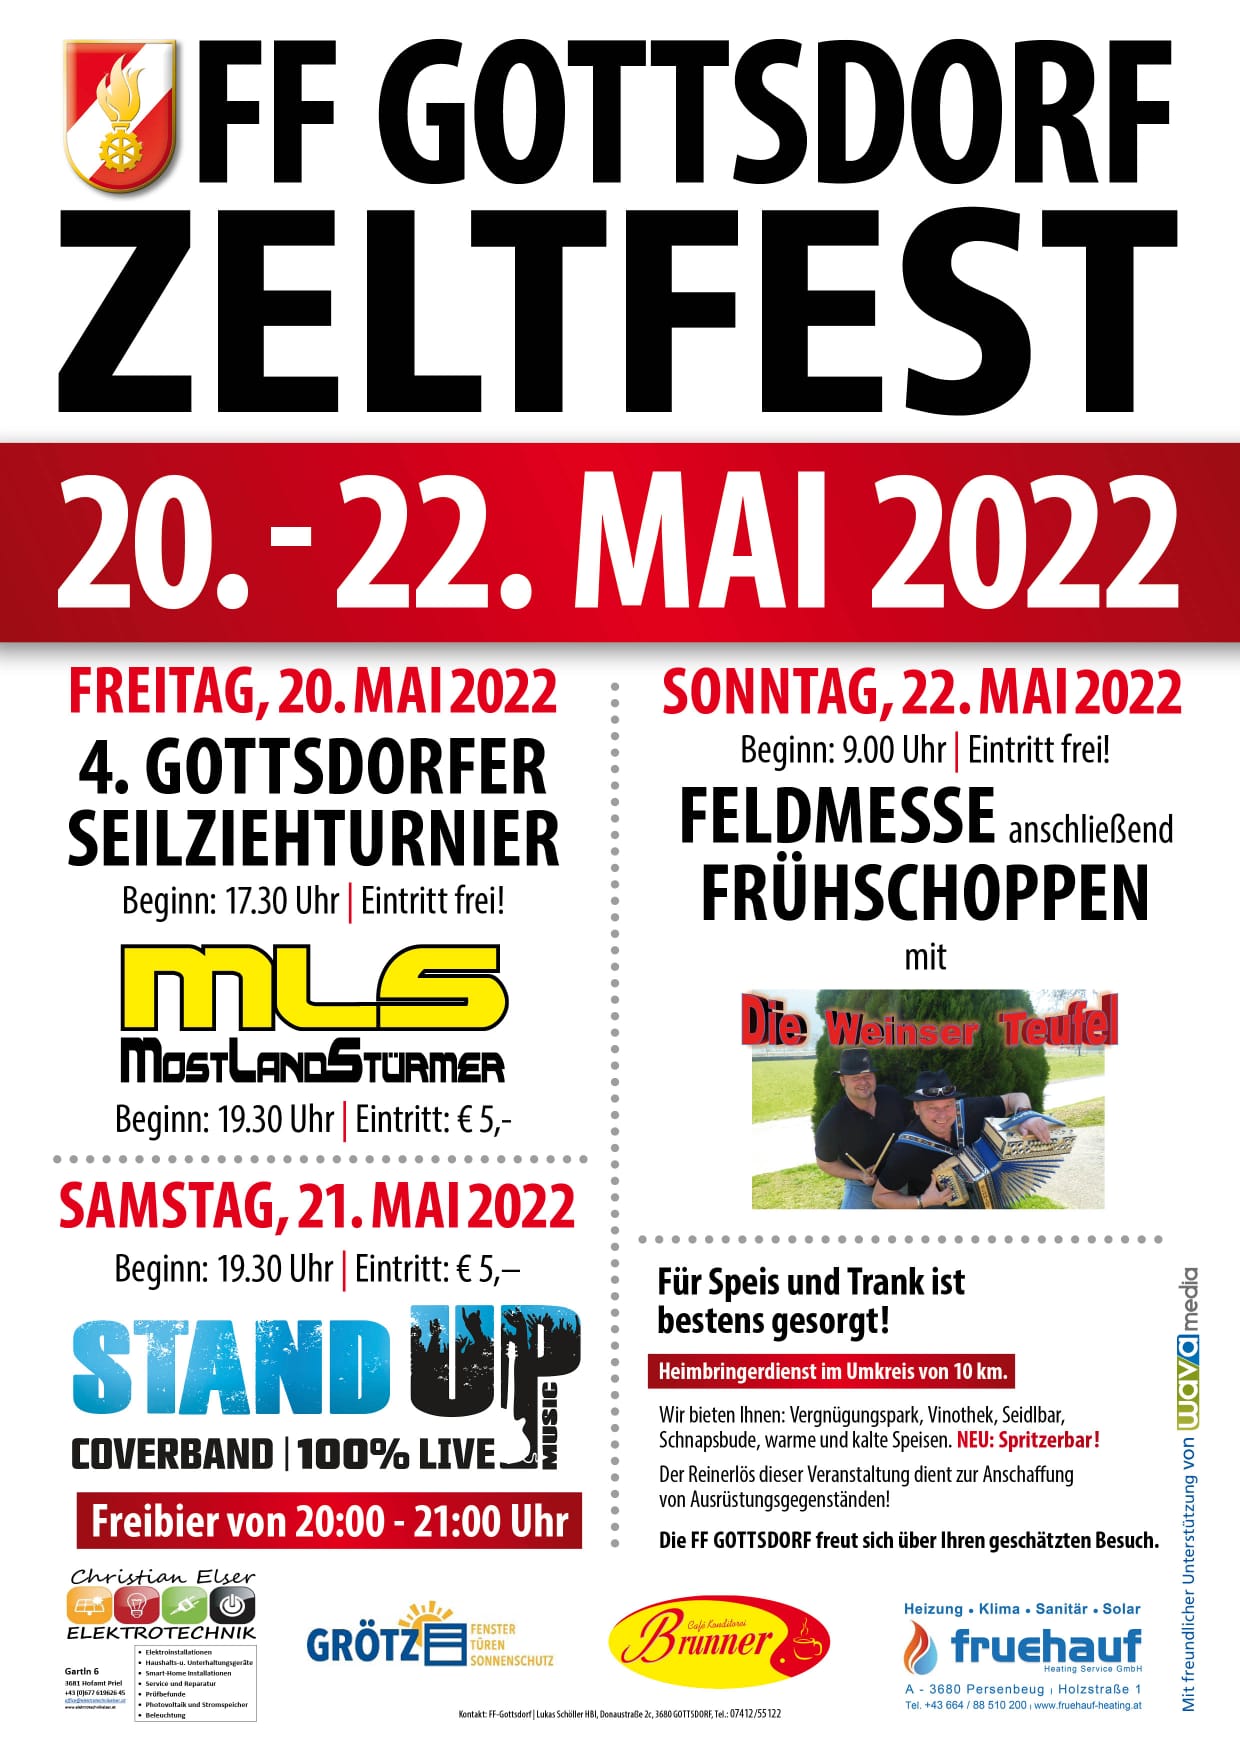 Save the Date! Zeltfest 2022 😎🎉🚒